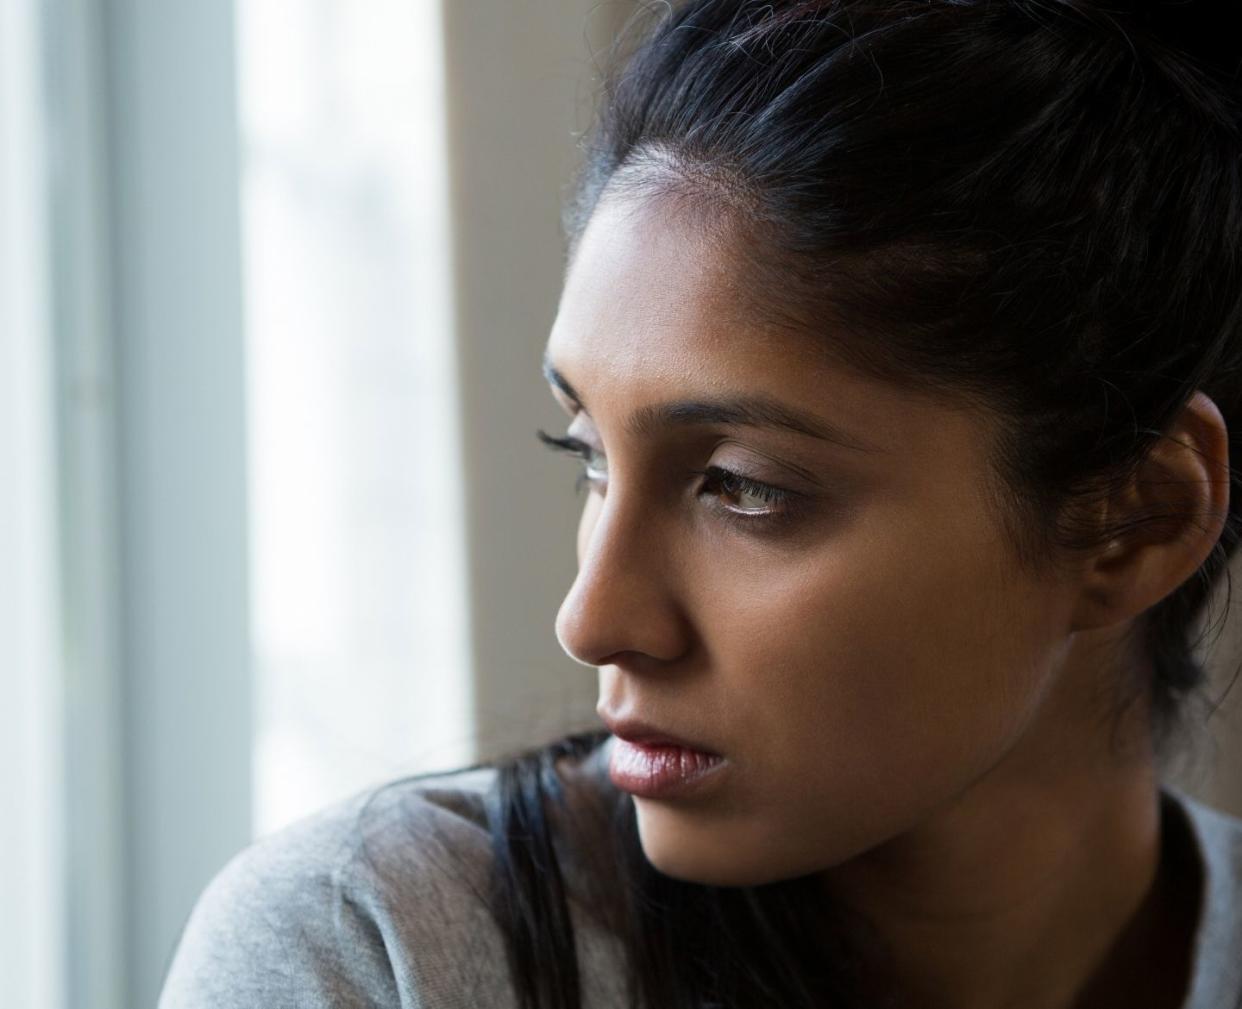 Mother's Day is complicated: contemplative woman looking out window